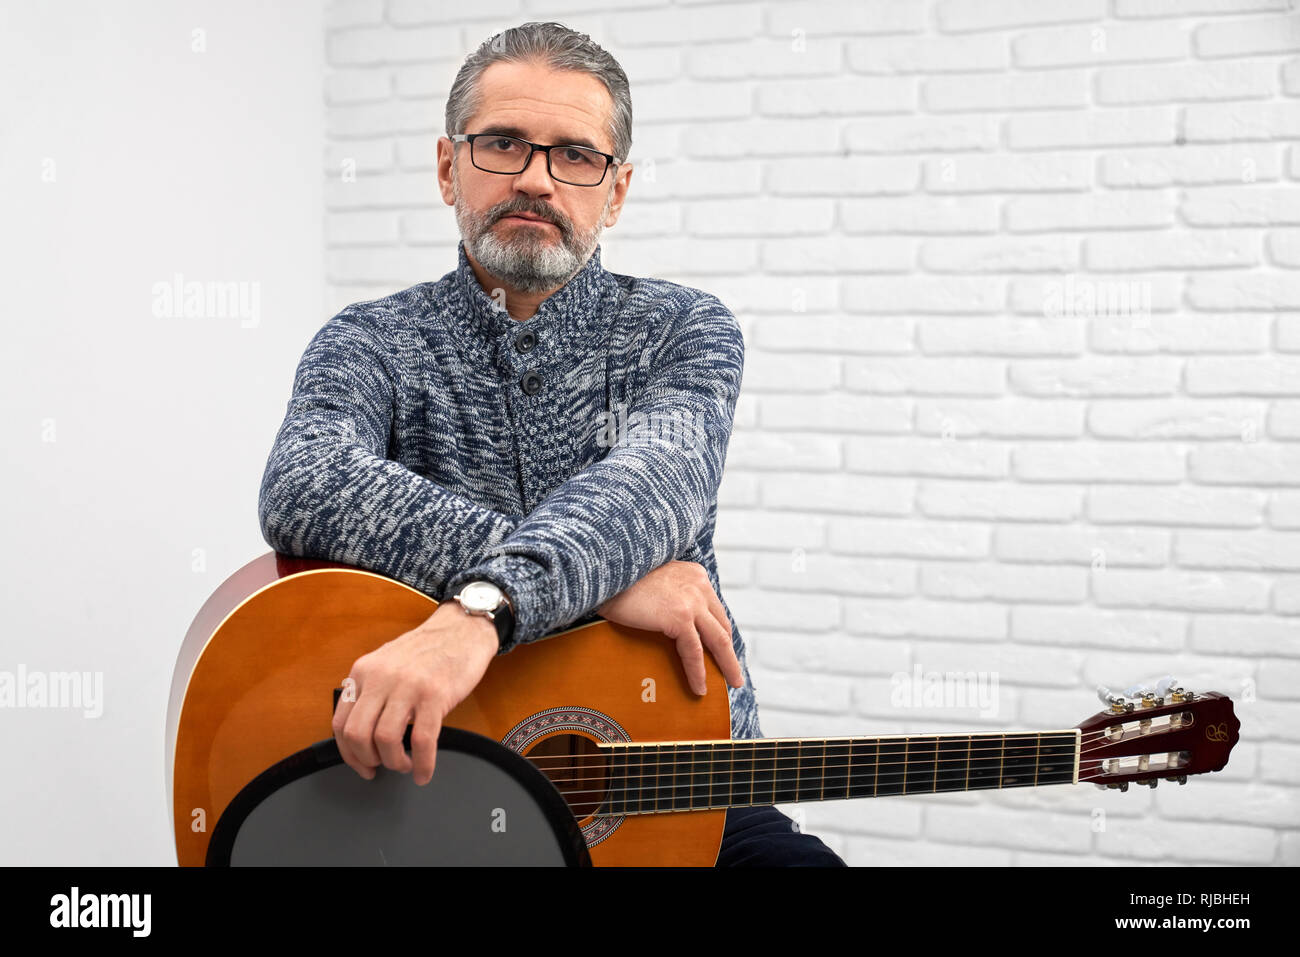 Handsome mature man sitting and holding acoustic guitar on knees. Bearded musician wearing glasses and watch. Man looking at camera and posing in studio with musical instrument. Stock Photo